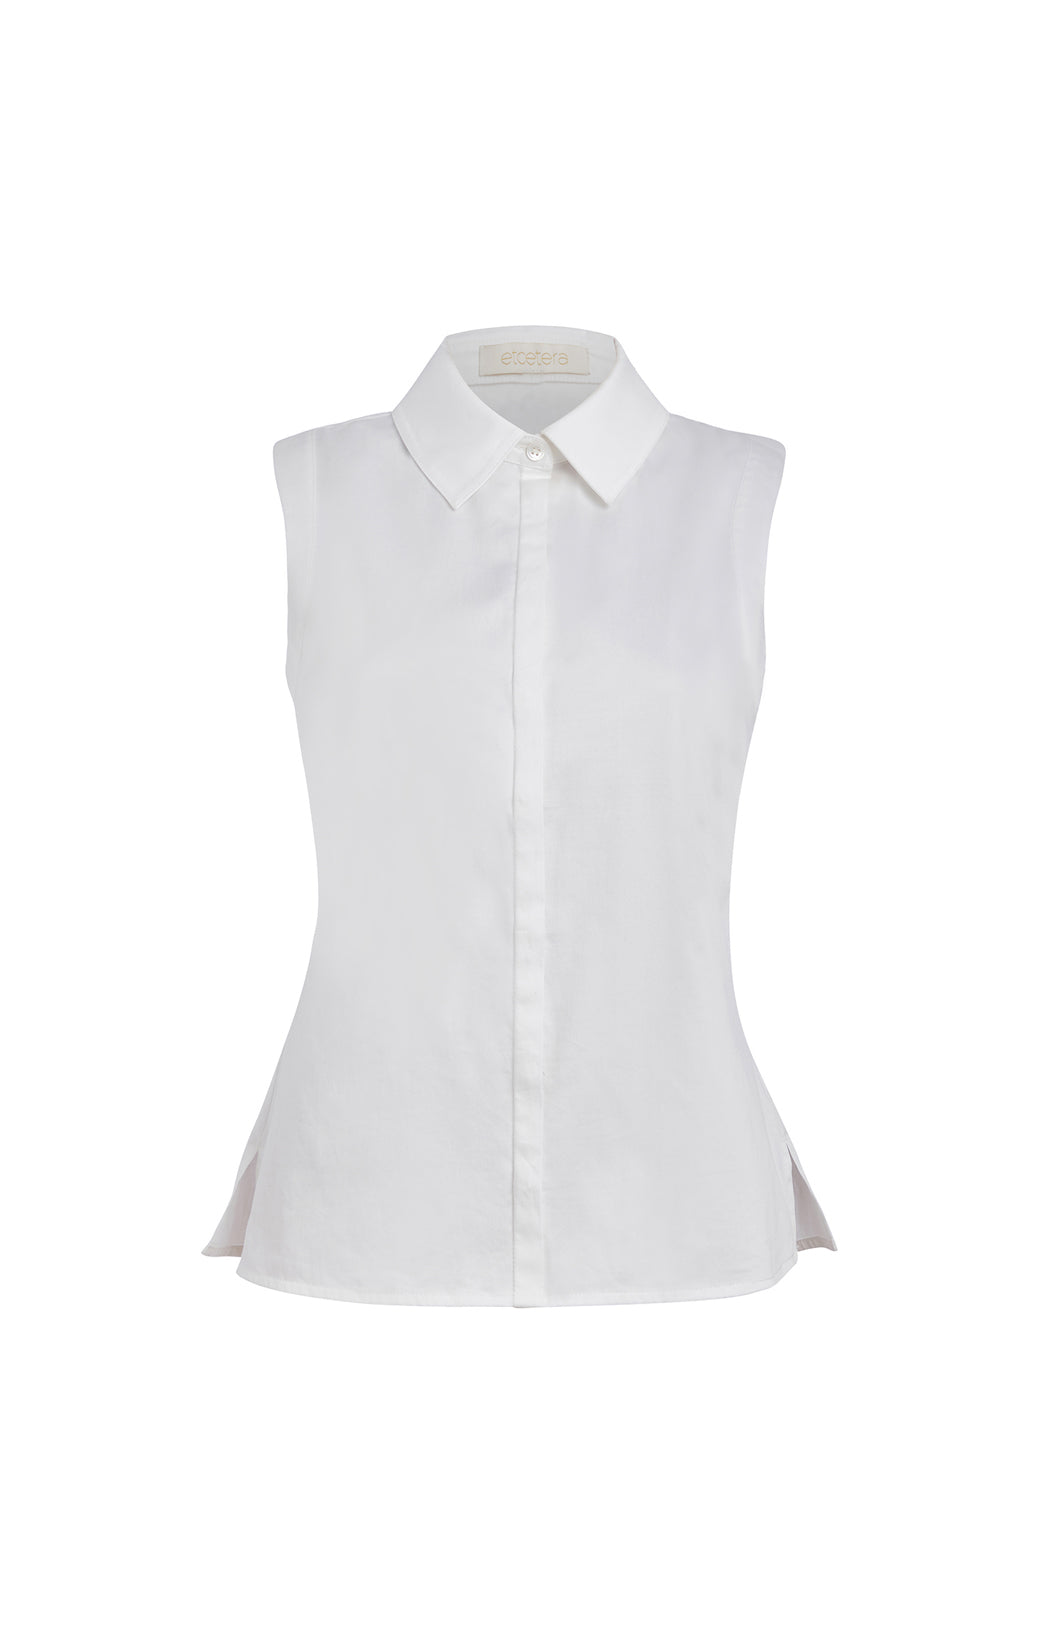 Free Time - Ribbon-Trimmed White Blouse In Stretch Linen - Product Image